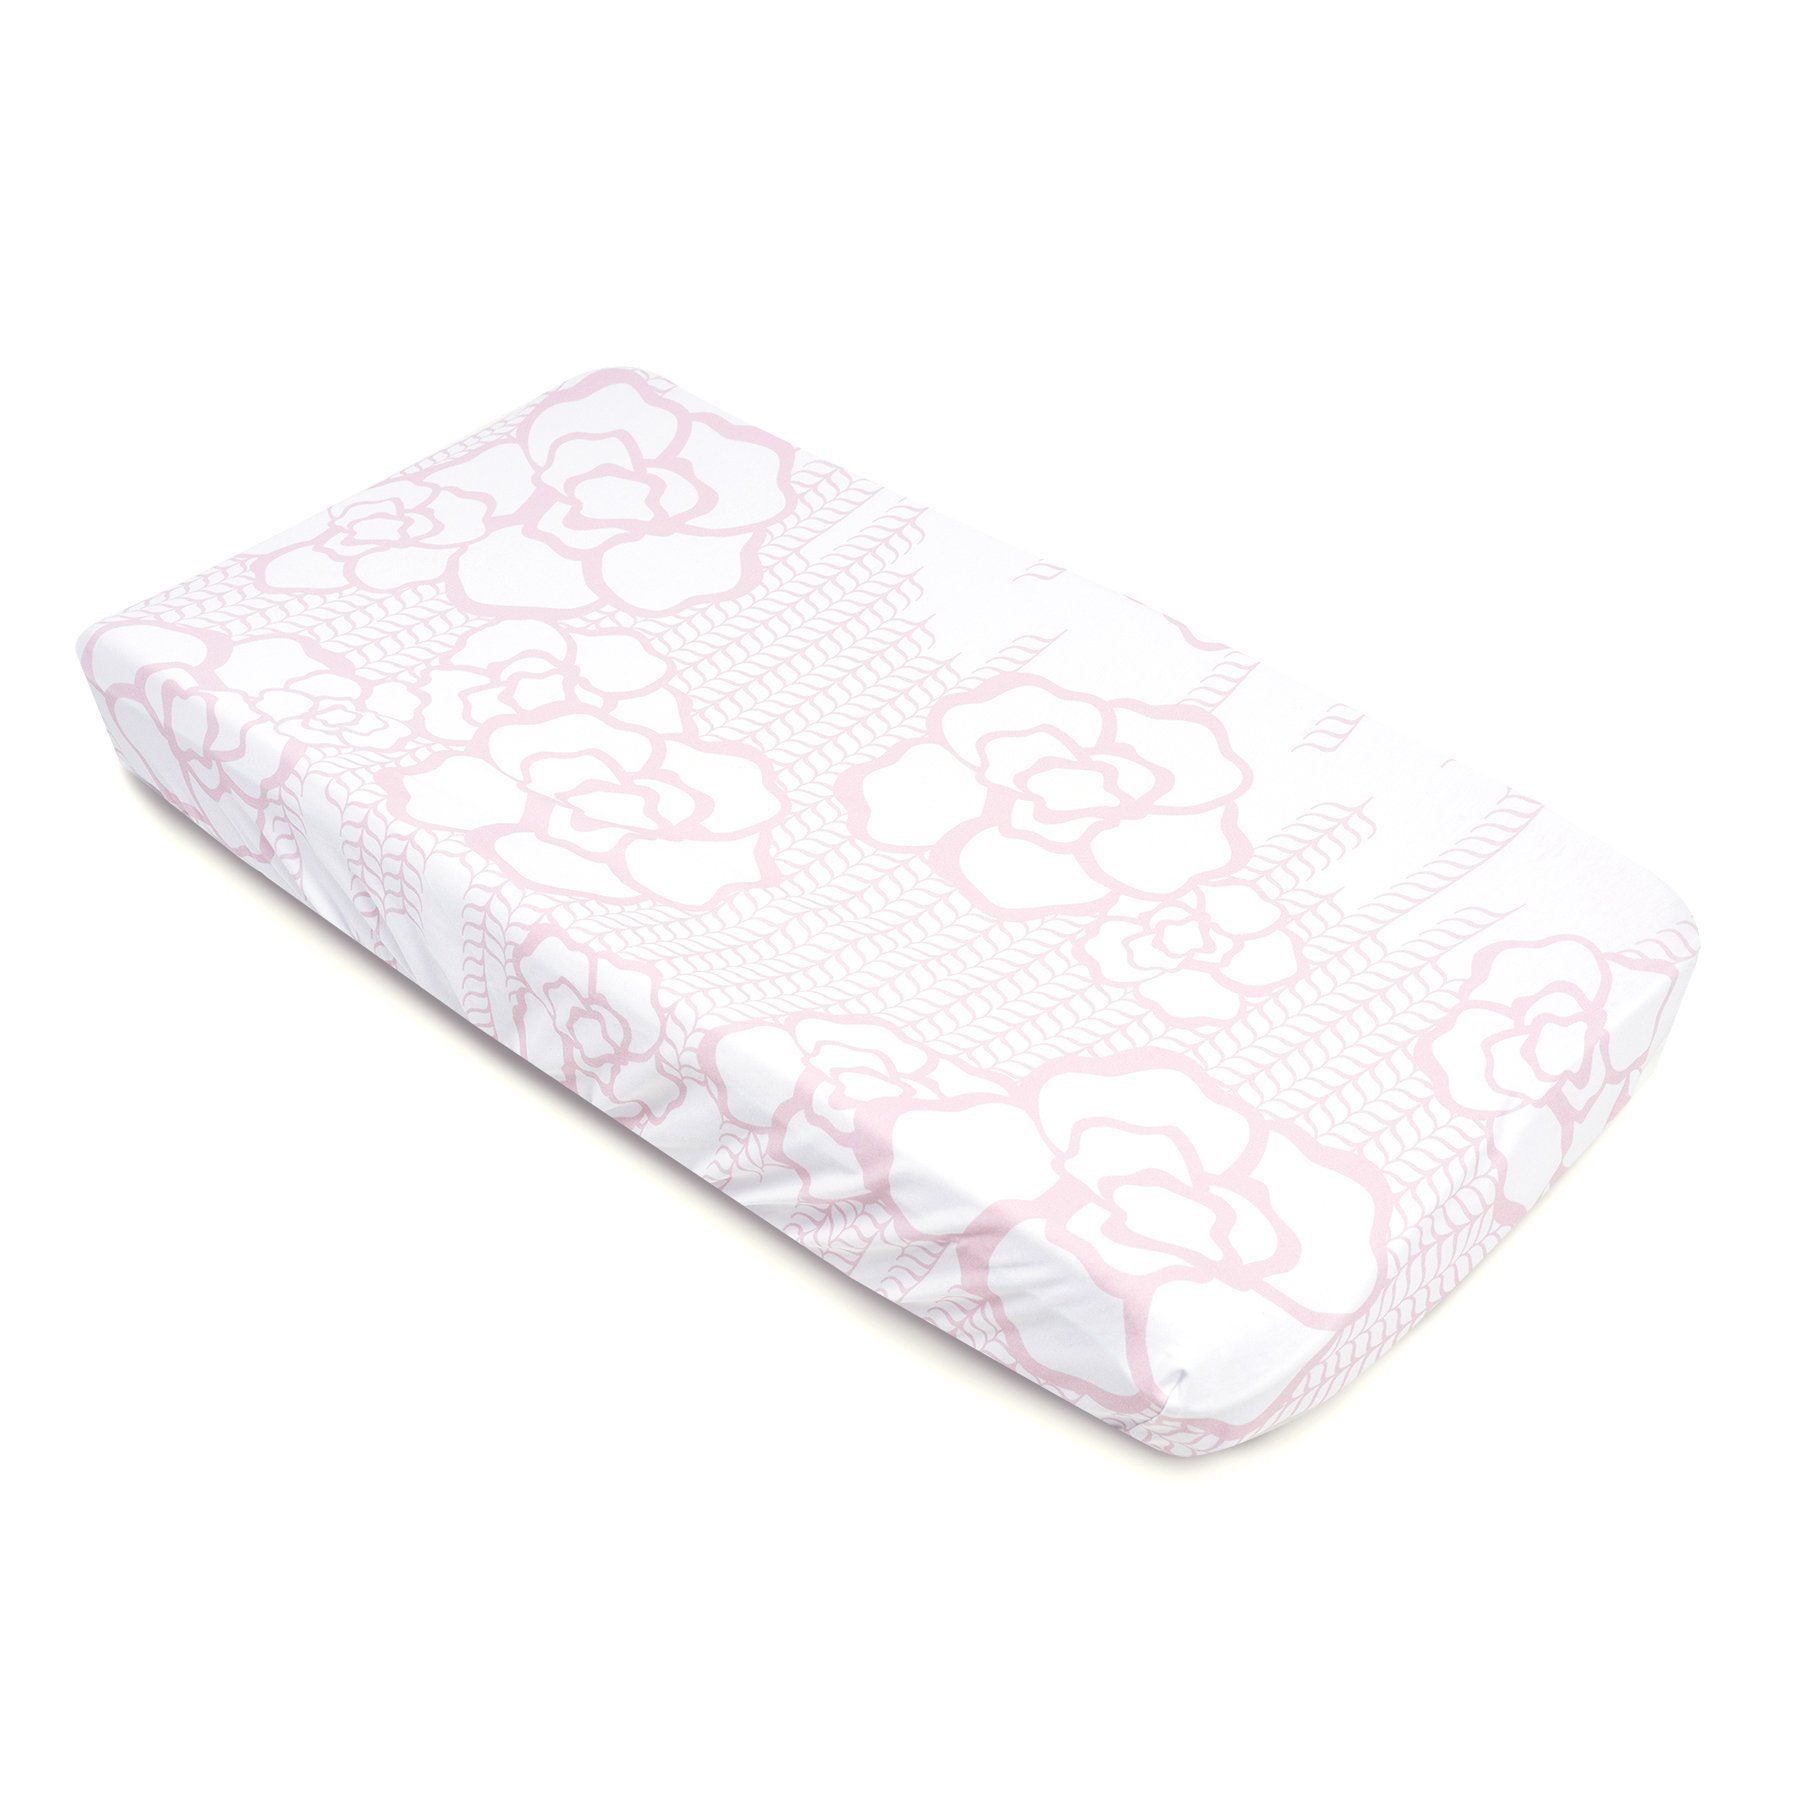 Capri Jersey Changing Pad Cover